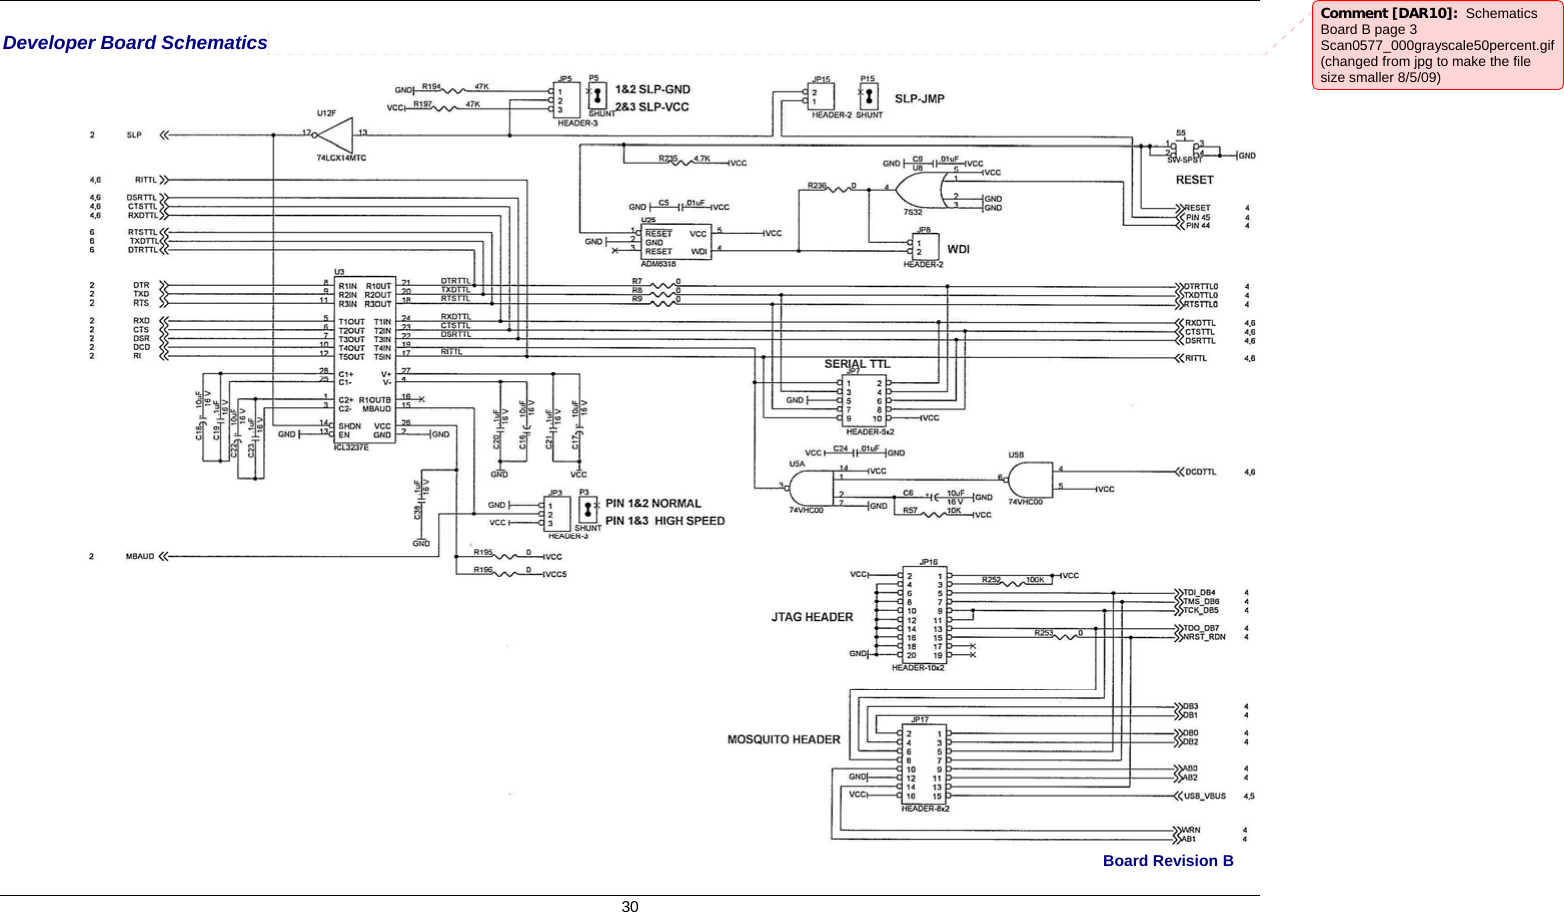     30 Developer Board Schematics Comment [DAR10]:  Schematics Board B page 3 Scan0577_000grayscale50percent.gif (changed from jpg to make the file size smaller 8/5/09)  Board Revision B 